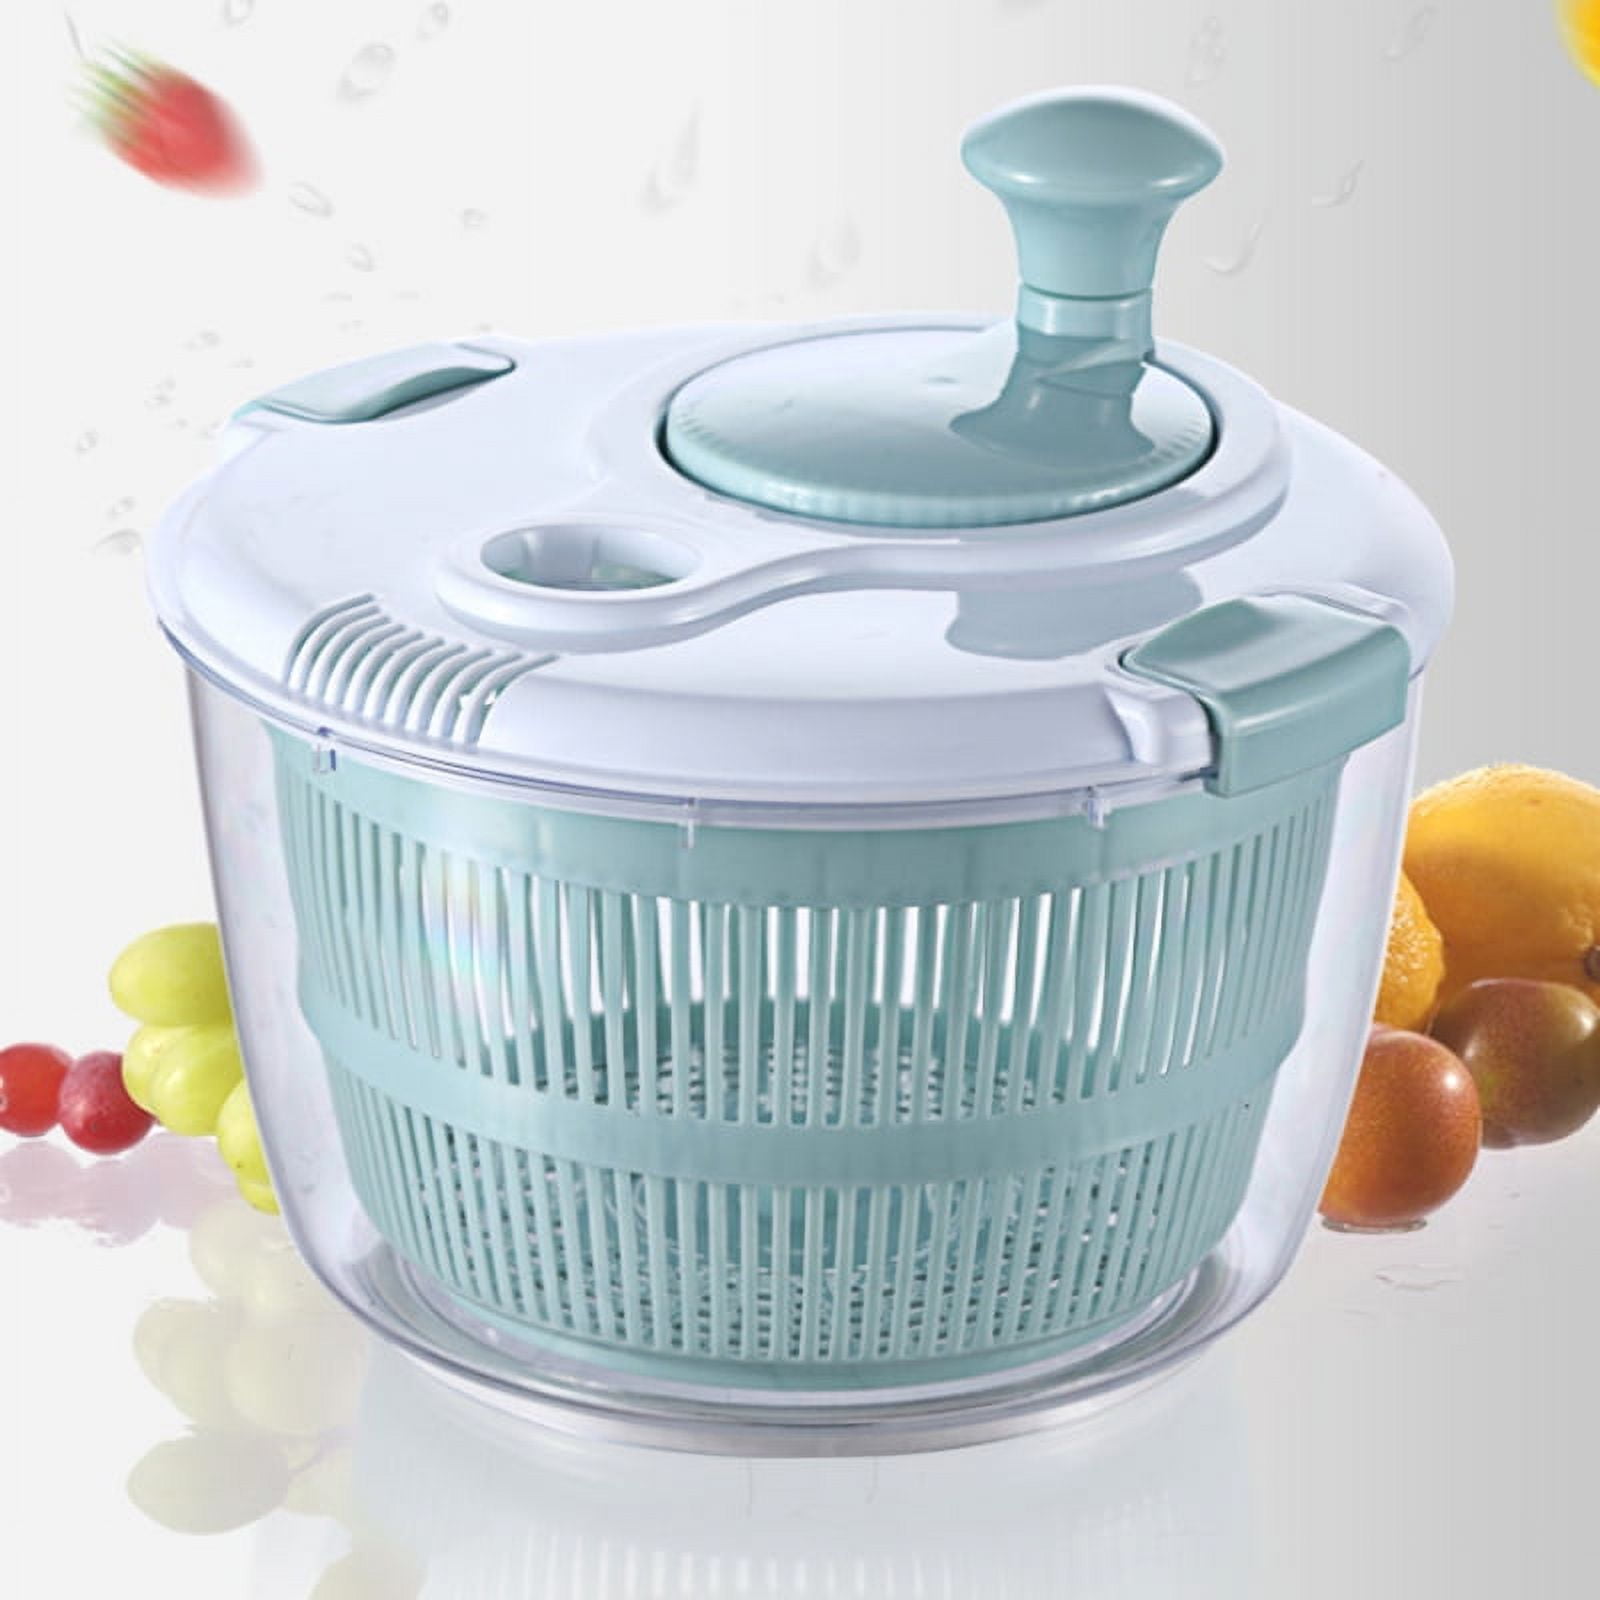 Kitchen Utensils and Homeware on Instagram: The Gourmet Salad Spinner  from KitchenAid has a soft grip lever for smooth and easy spinning. The  locking mechanism keeps handle locked down for convenient and